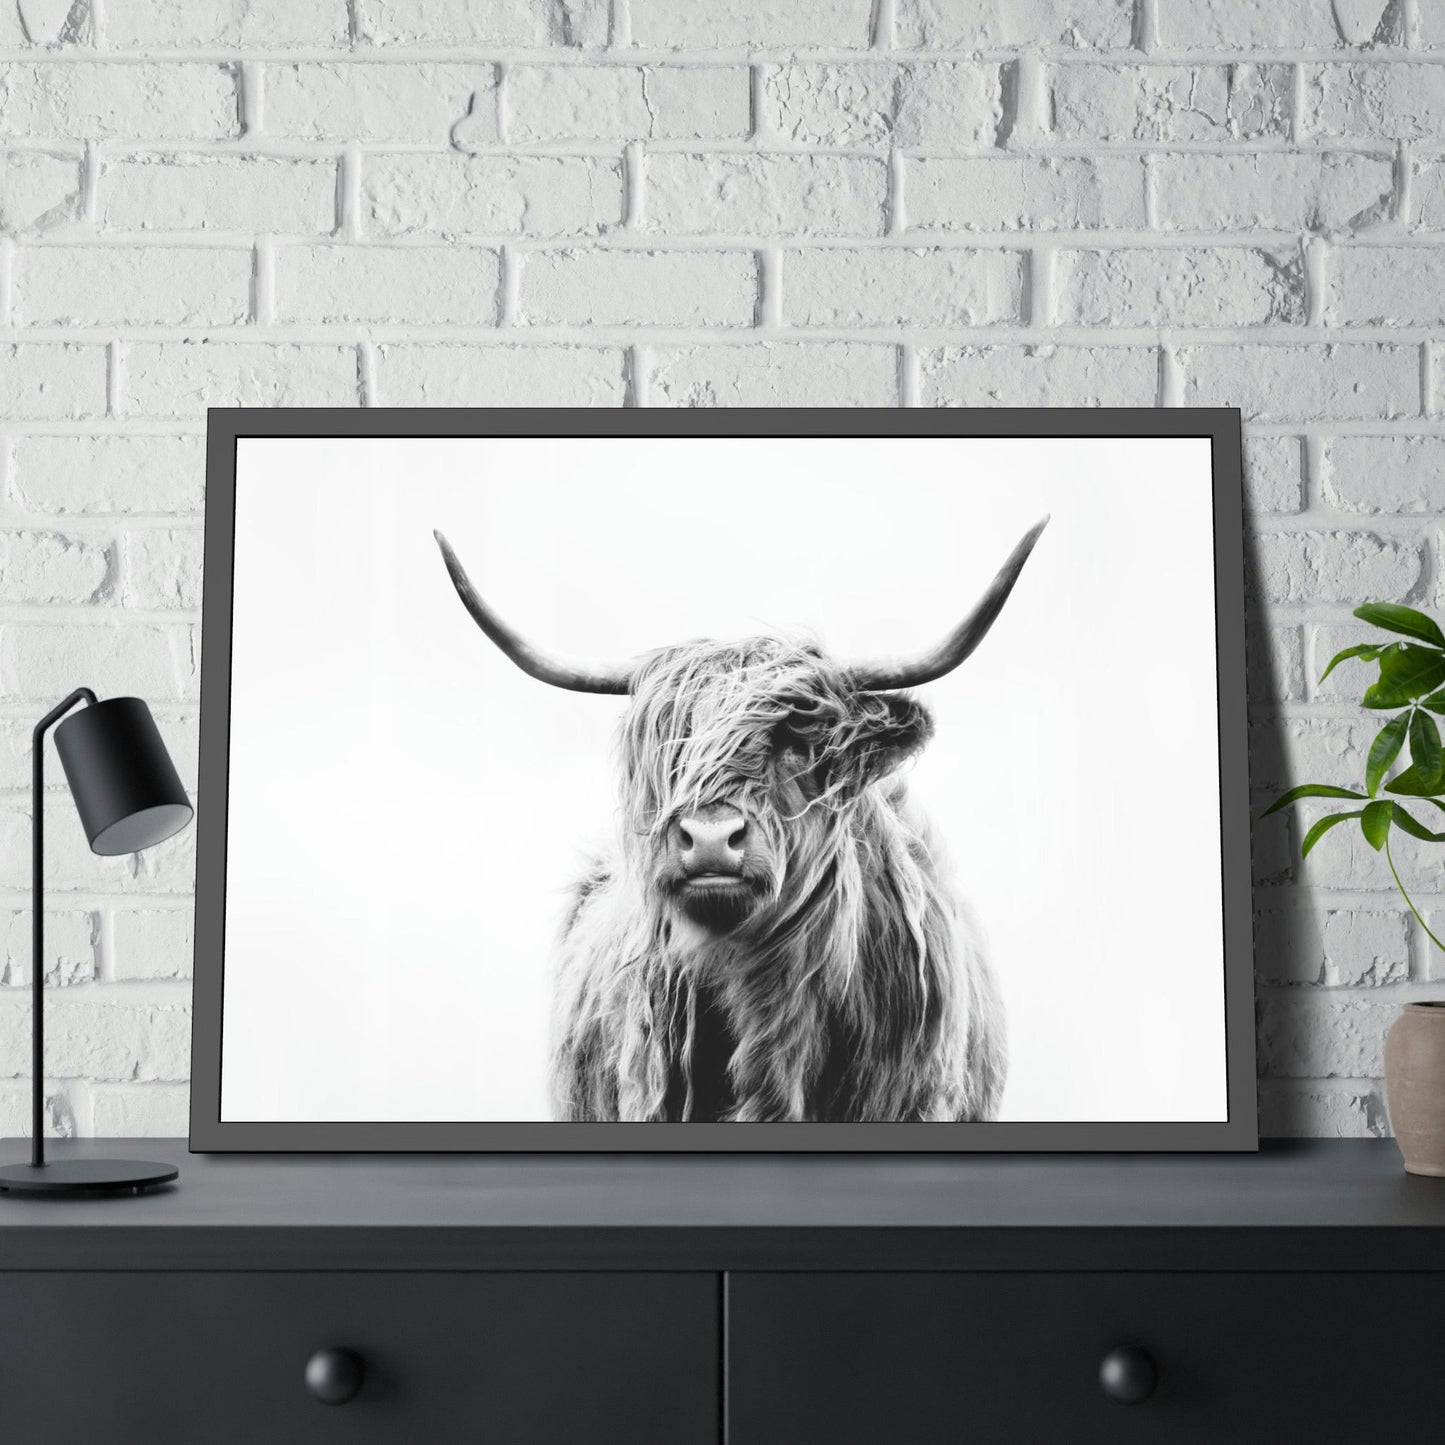 Nature's Majesty: Cow Art for a Breathtaking Wall Art Statement